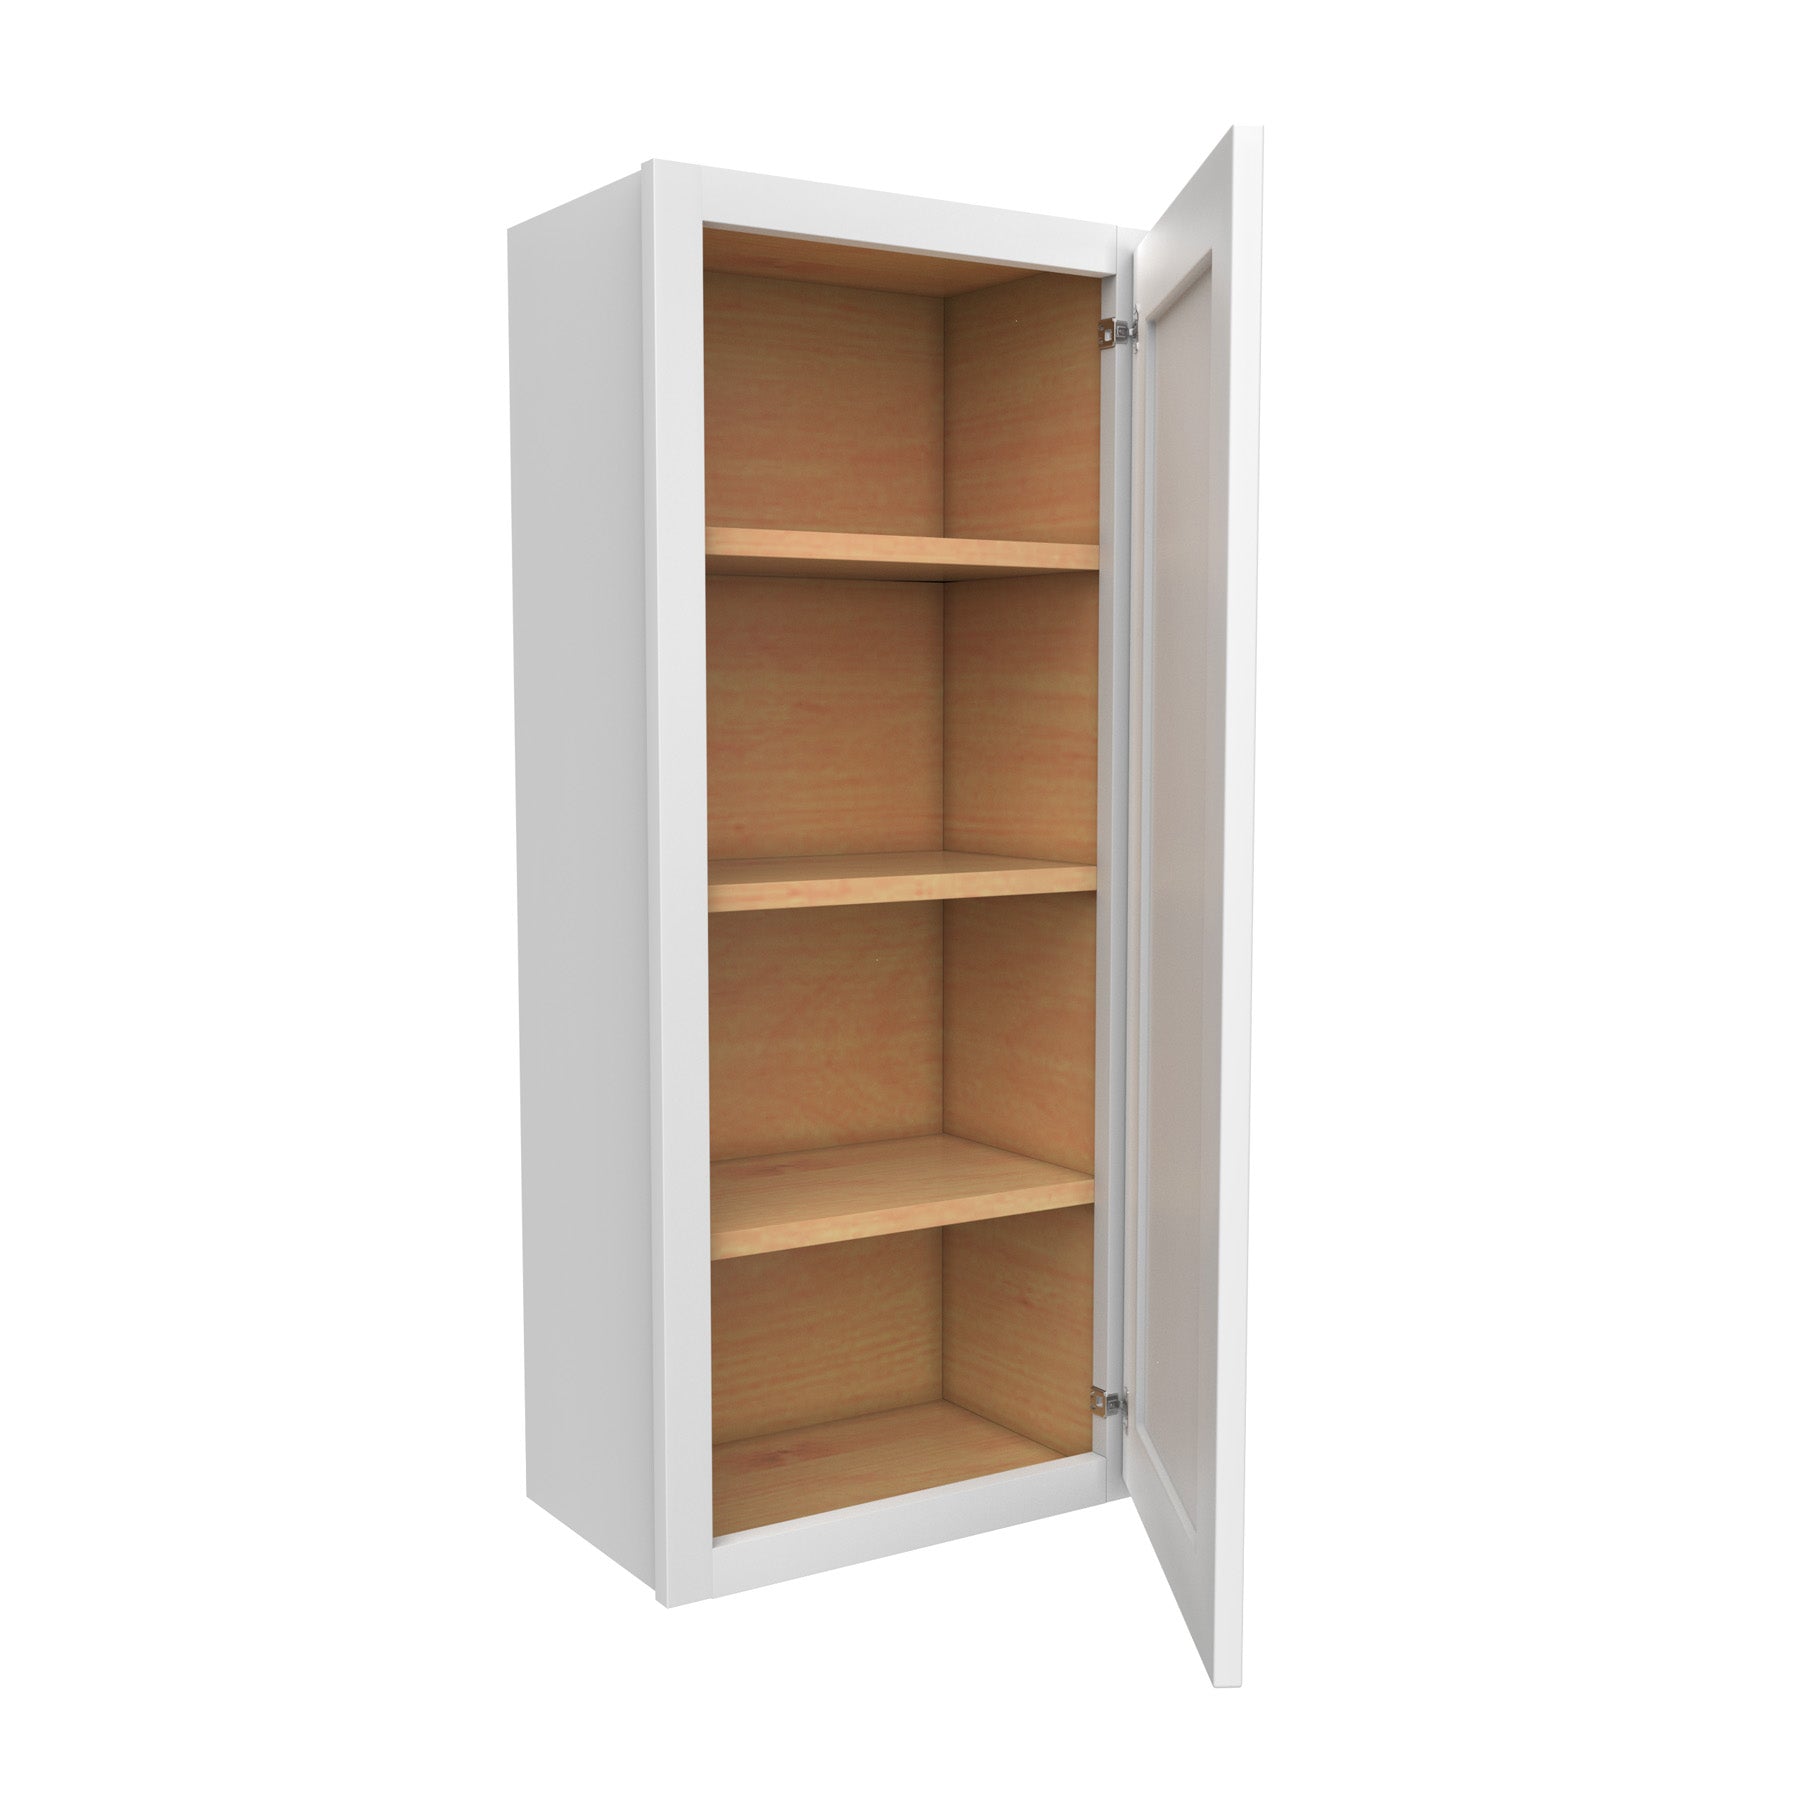 42 Inch High Single Door Wall Cabinet - Luxor White Shaker - Ready To Assemble, 18"W x 42"H x 12"D